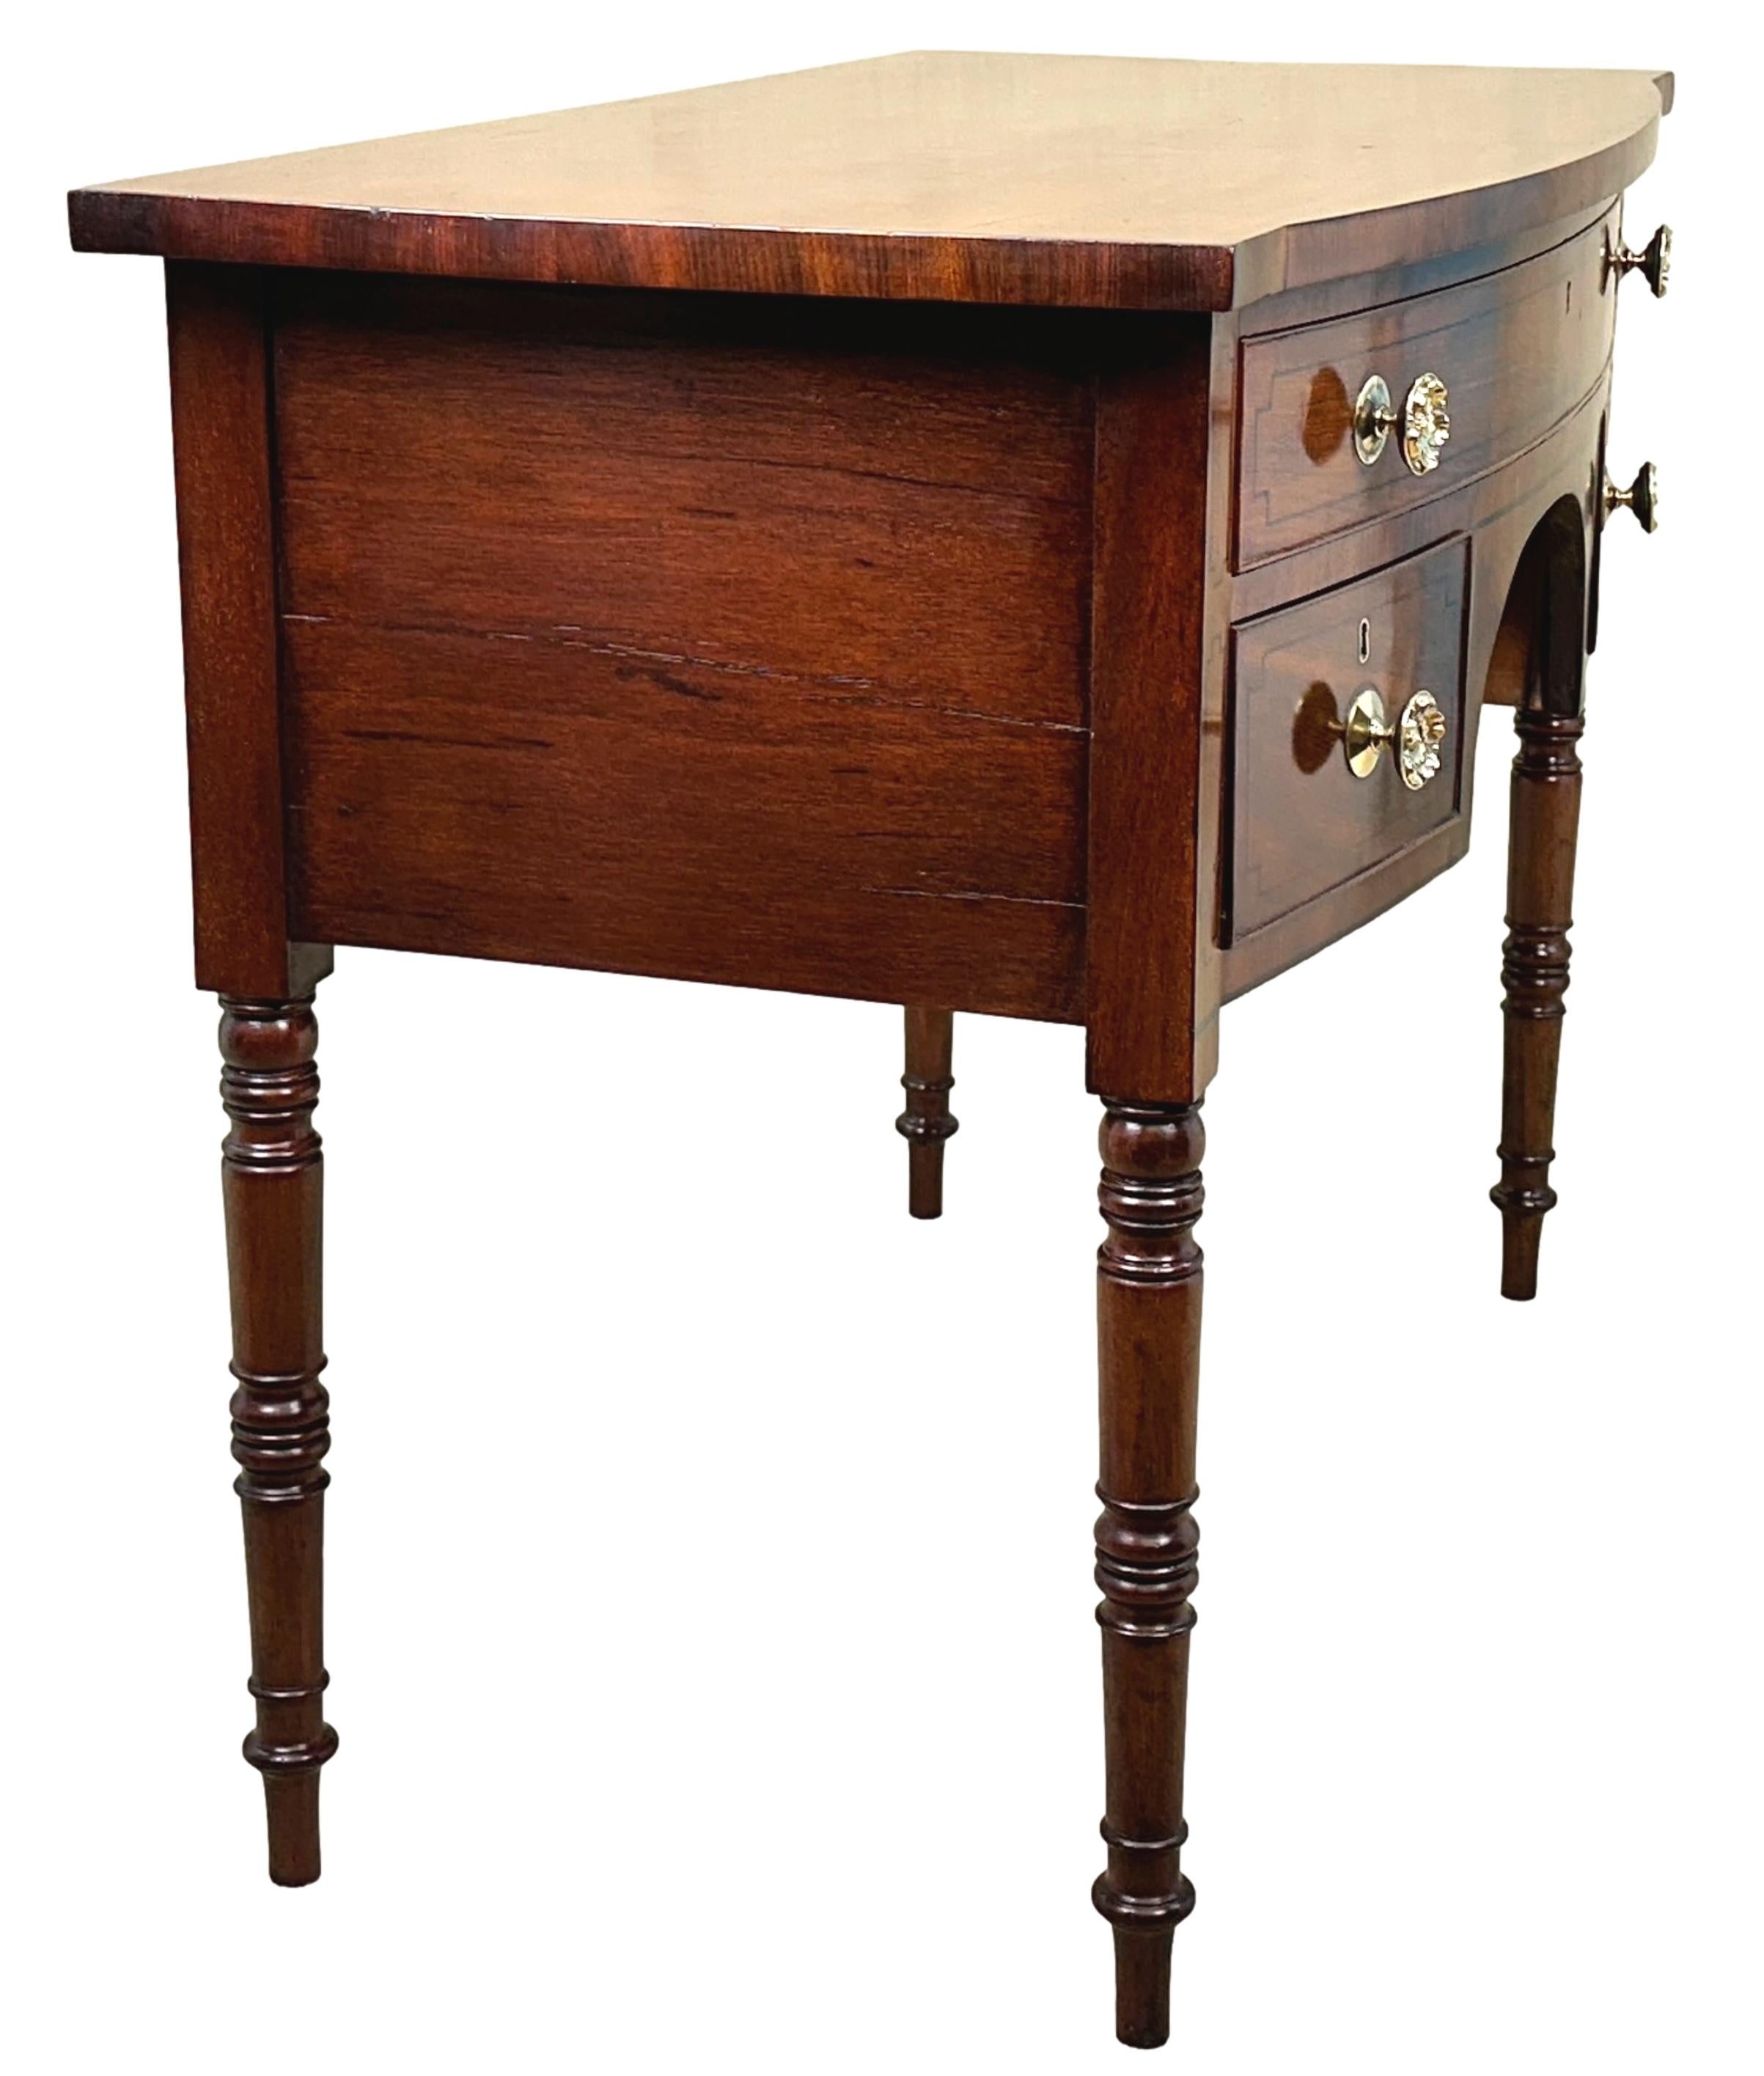 A Good Quality, Late 18th Century, George III Period Mahogany Bowfronted Dressing Table, Of Good Rich Colour Throughout, Having Well Figured Top, Over One Long And Two Short Drawers With Replacement Brass Knobs To Elegant Arched Frieze With Ebonised